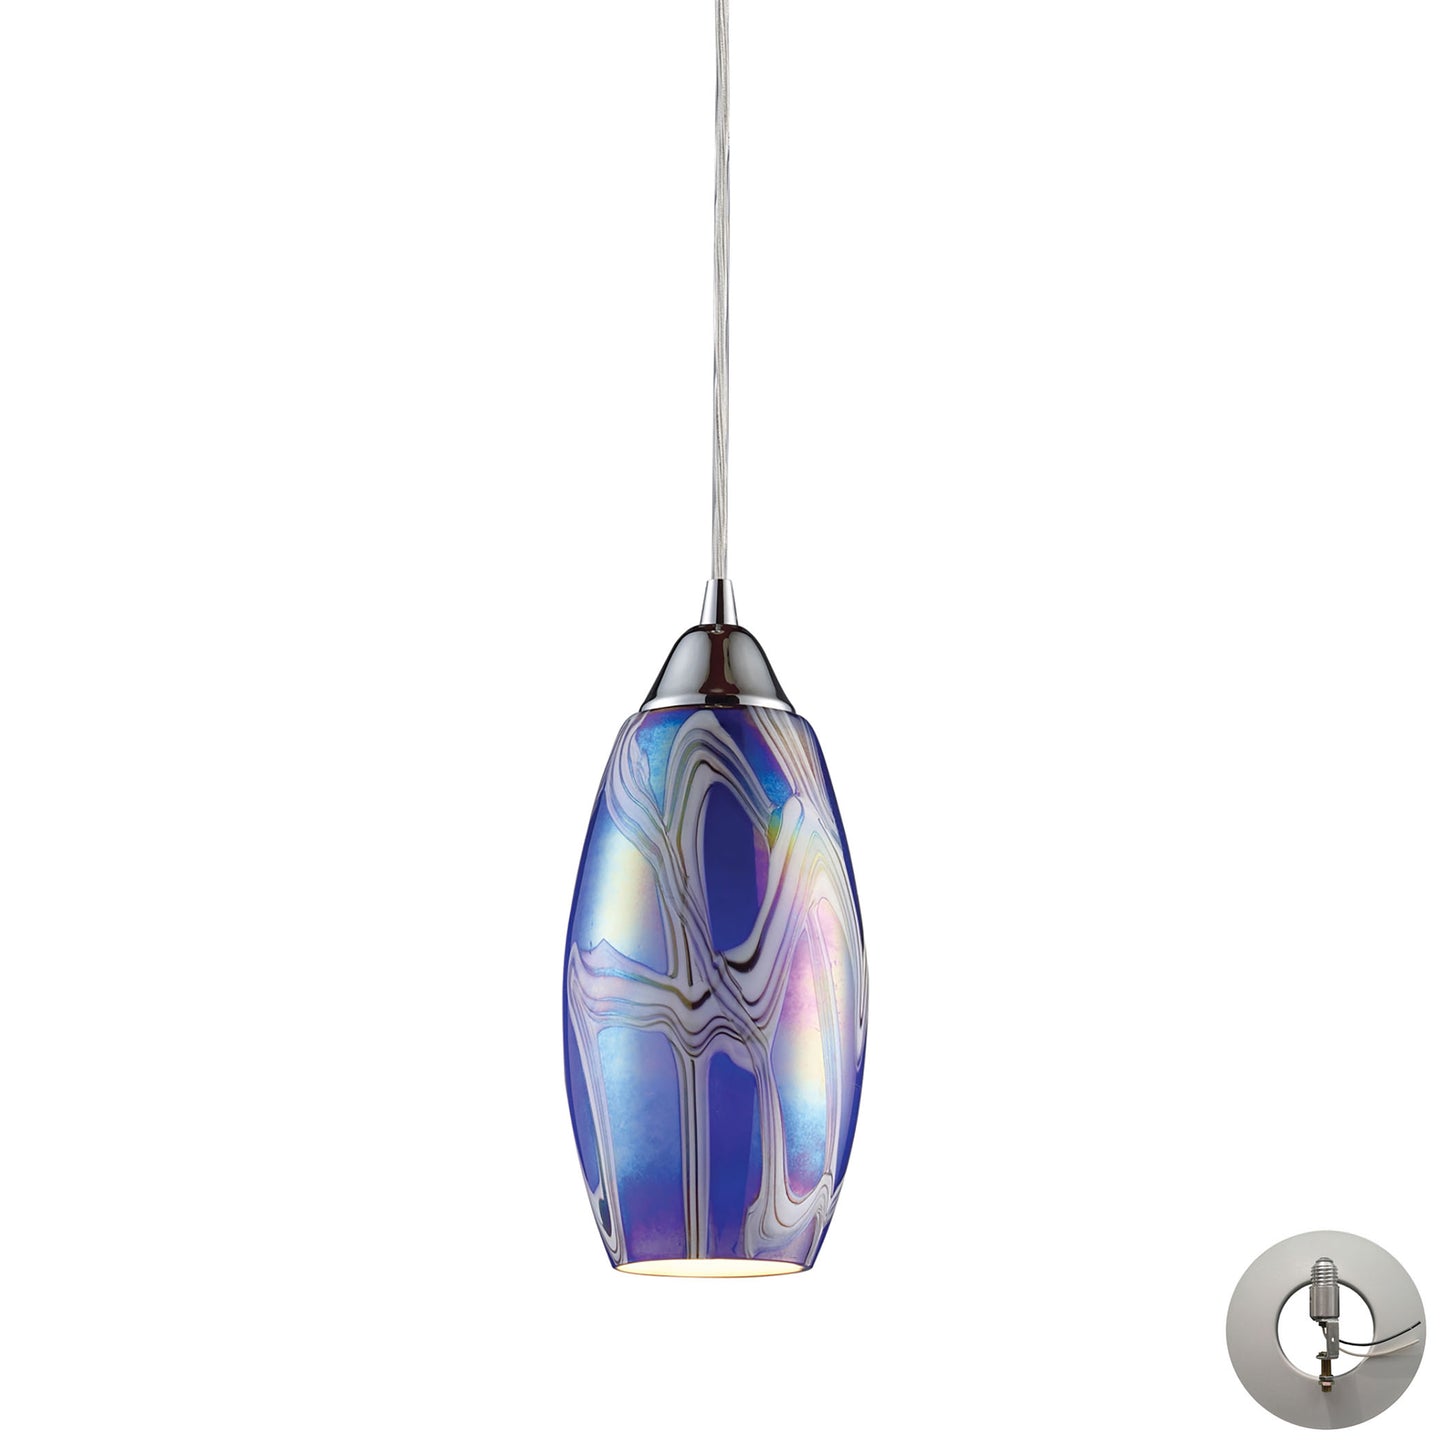 Iridescence 1-Light Mini Pendant in Satin Nickel with Storm Blue Glass - Includes Adapter Kit